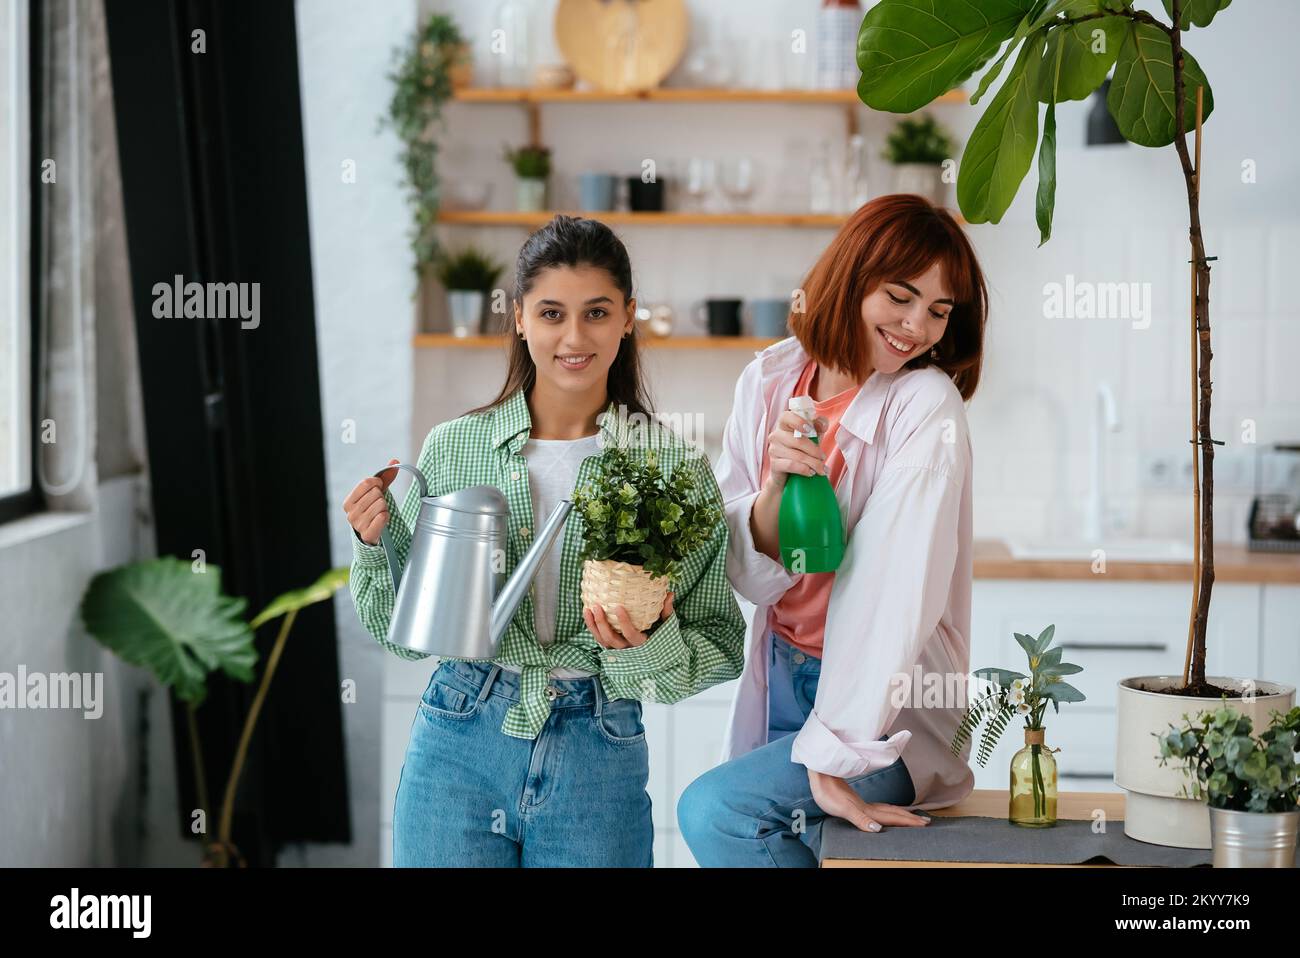 Women with a watering can and a houseplant Stock Photo